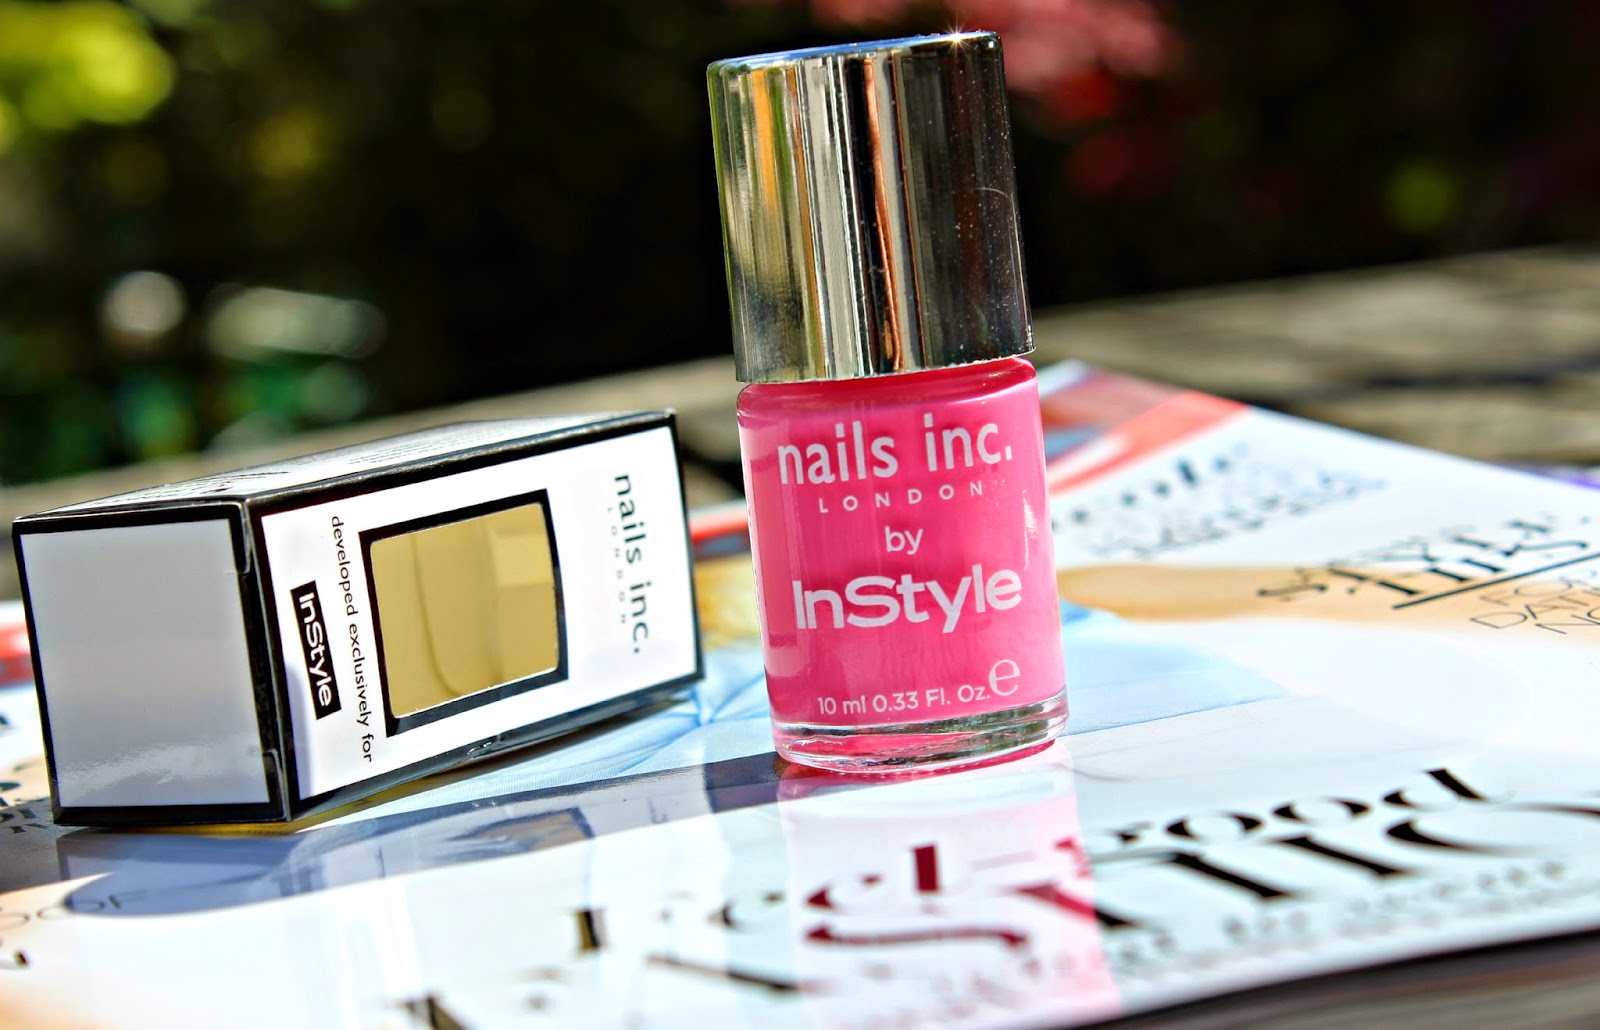 A picture of Nails Inc with June Instyle